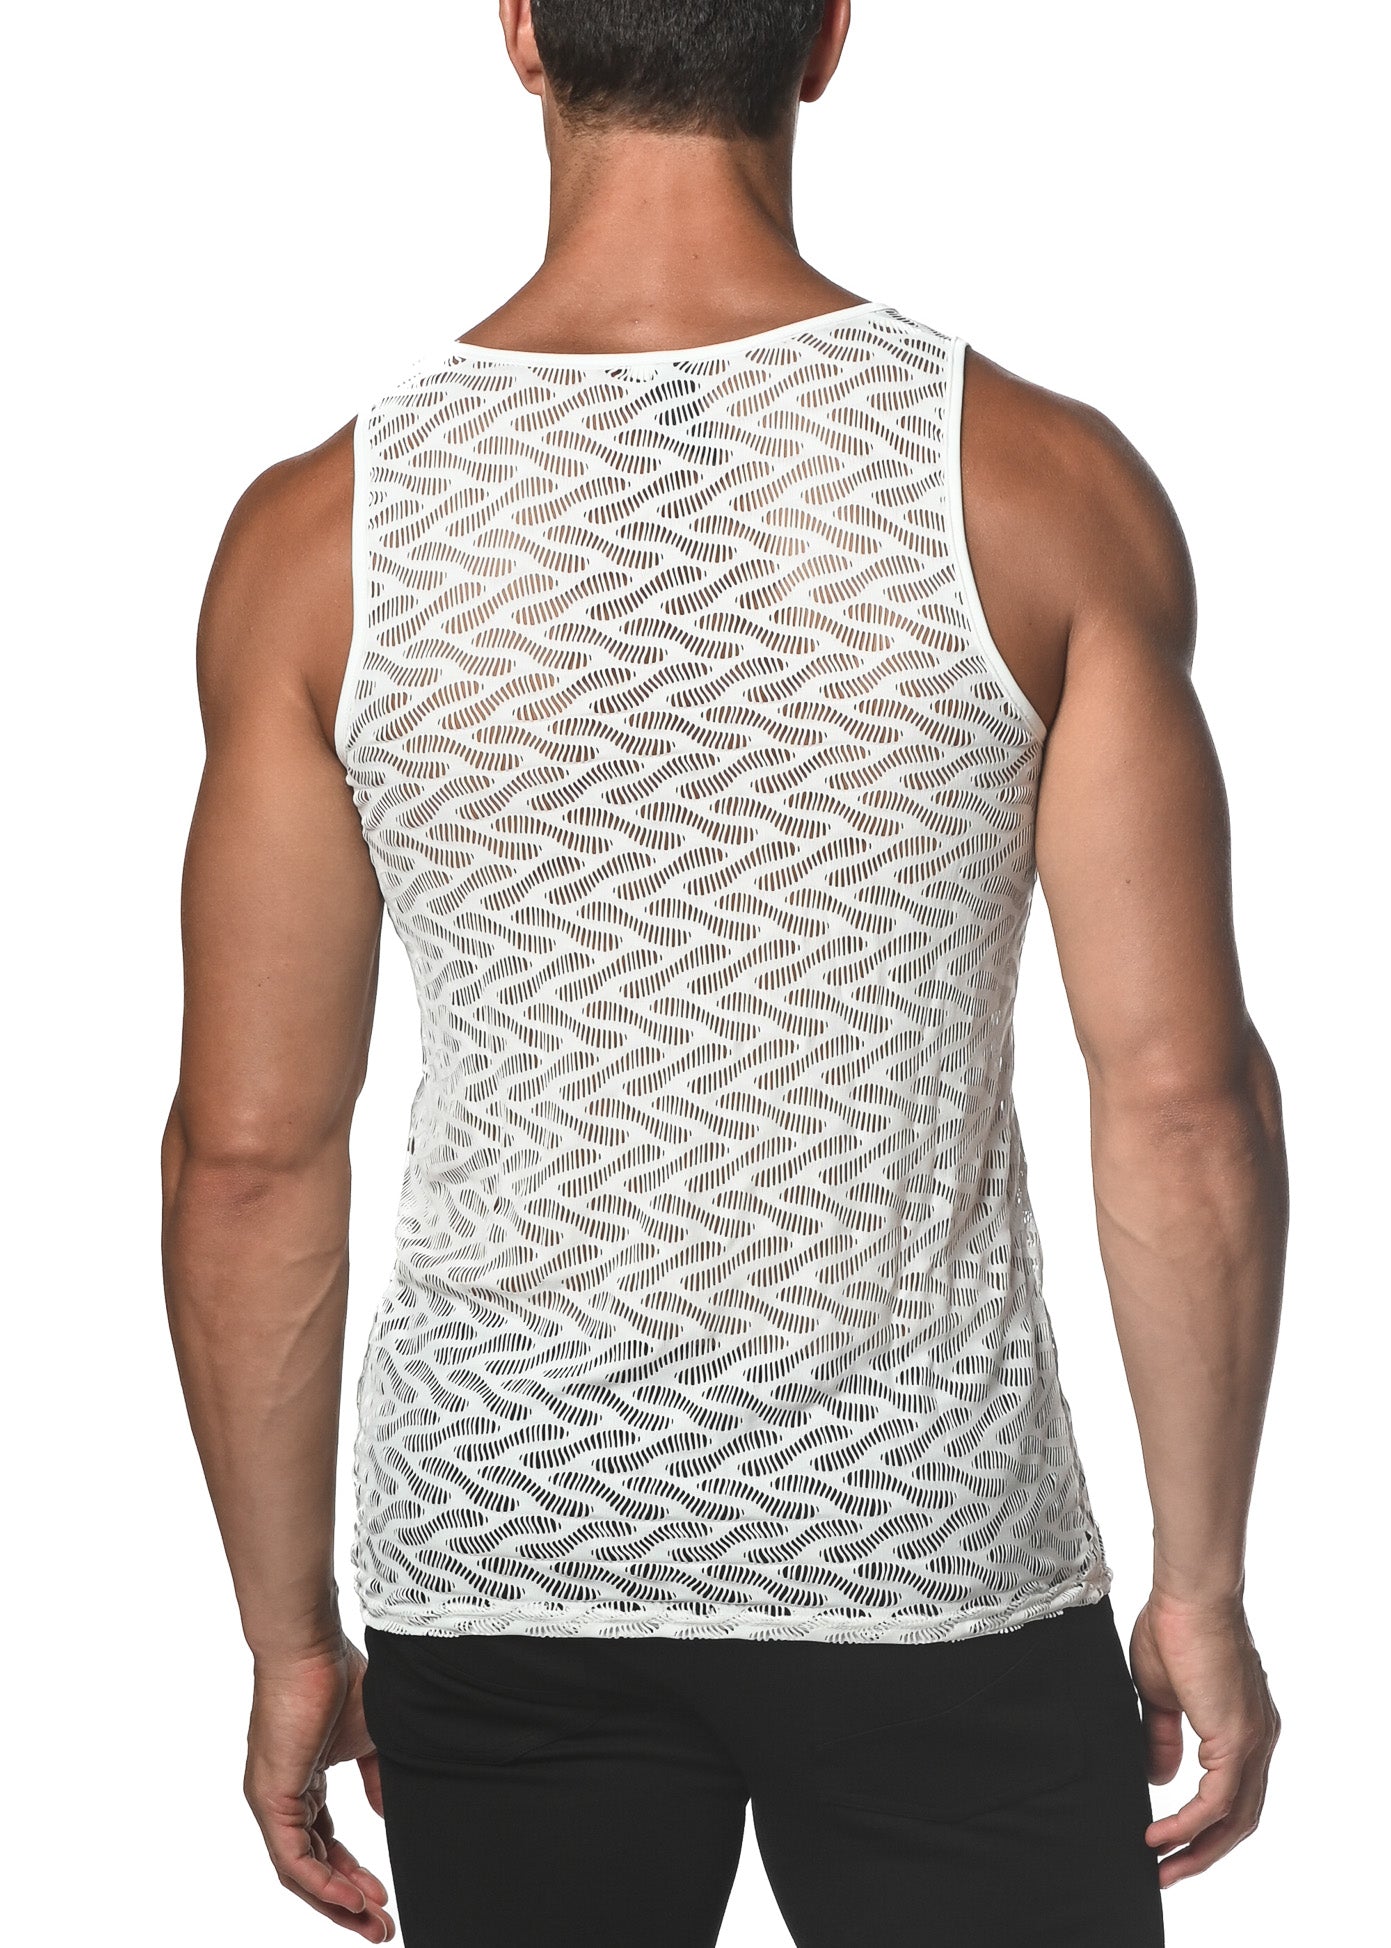 St33le Squiggly Gossamer Lace Tanks